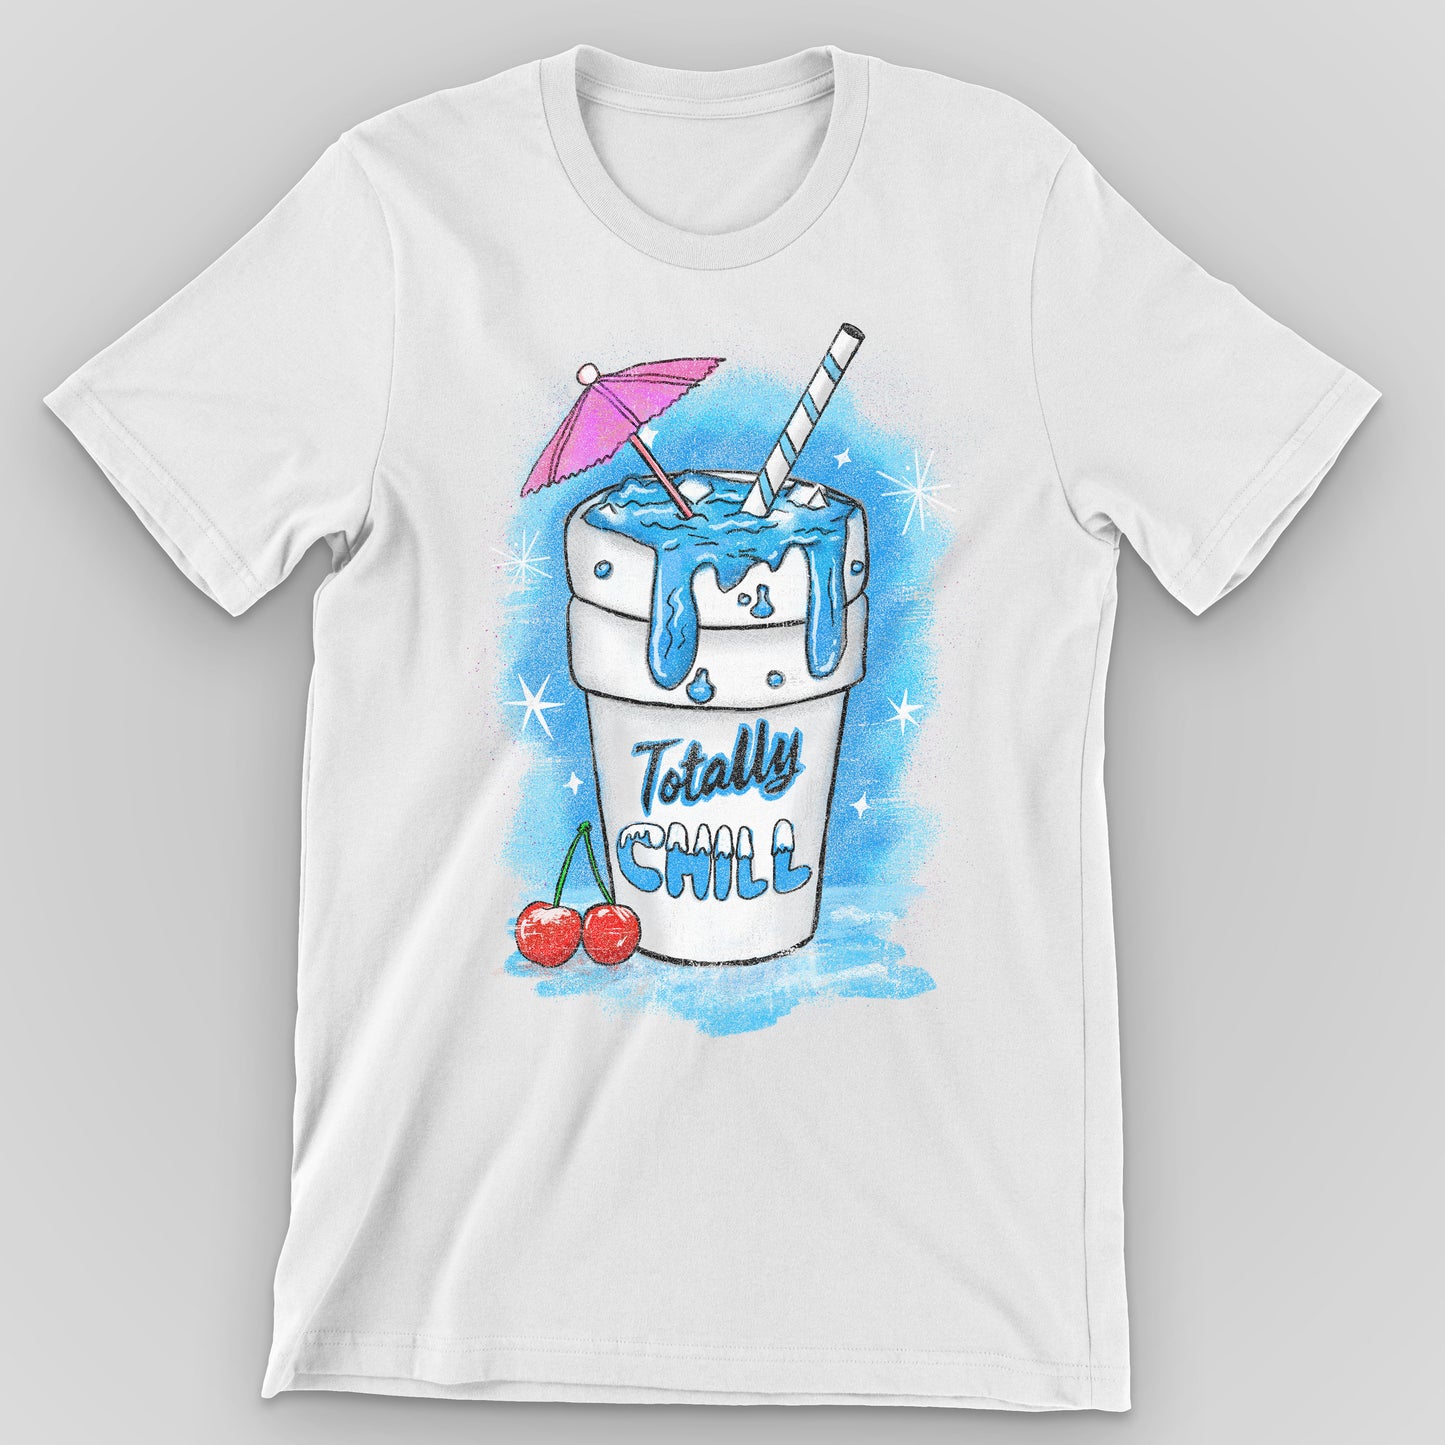 White Totally Chill Graphic T-Shirt by Snaxtime